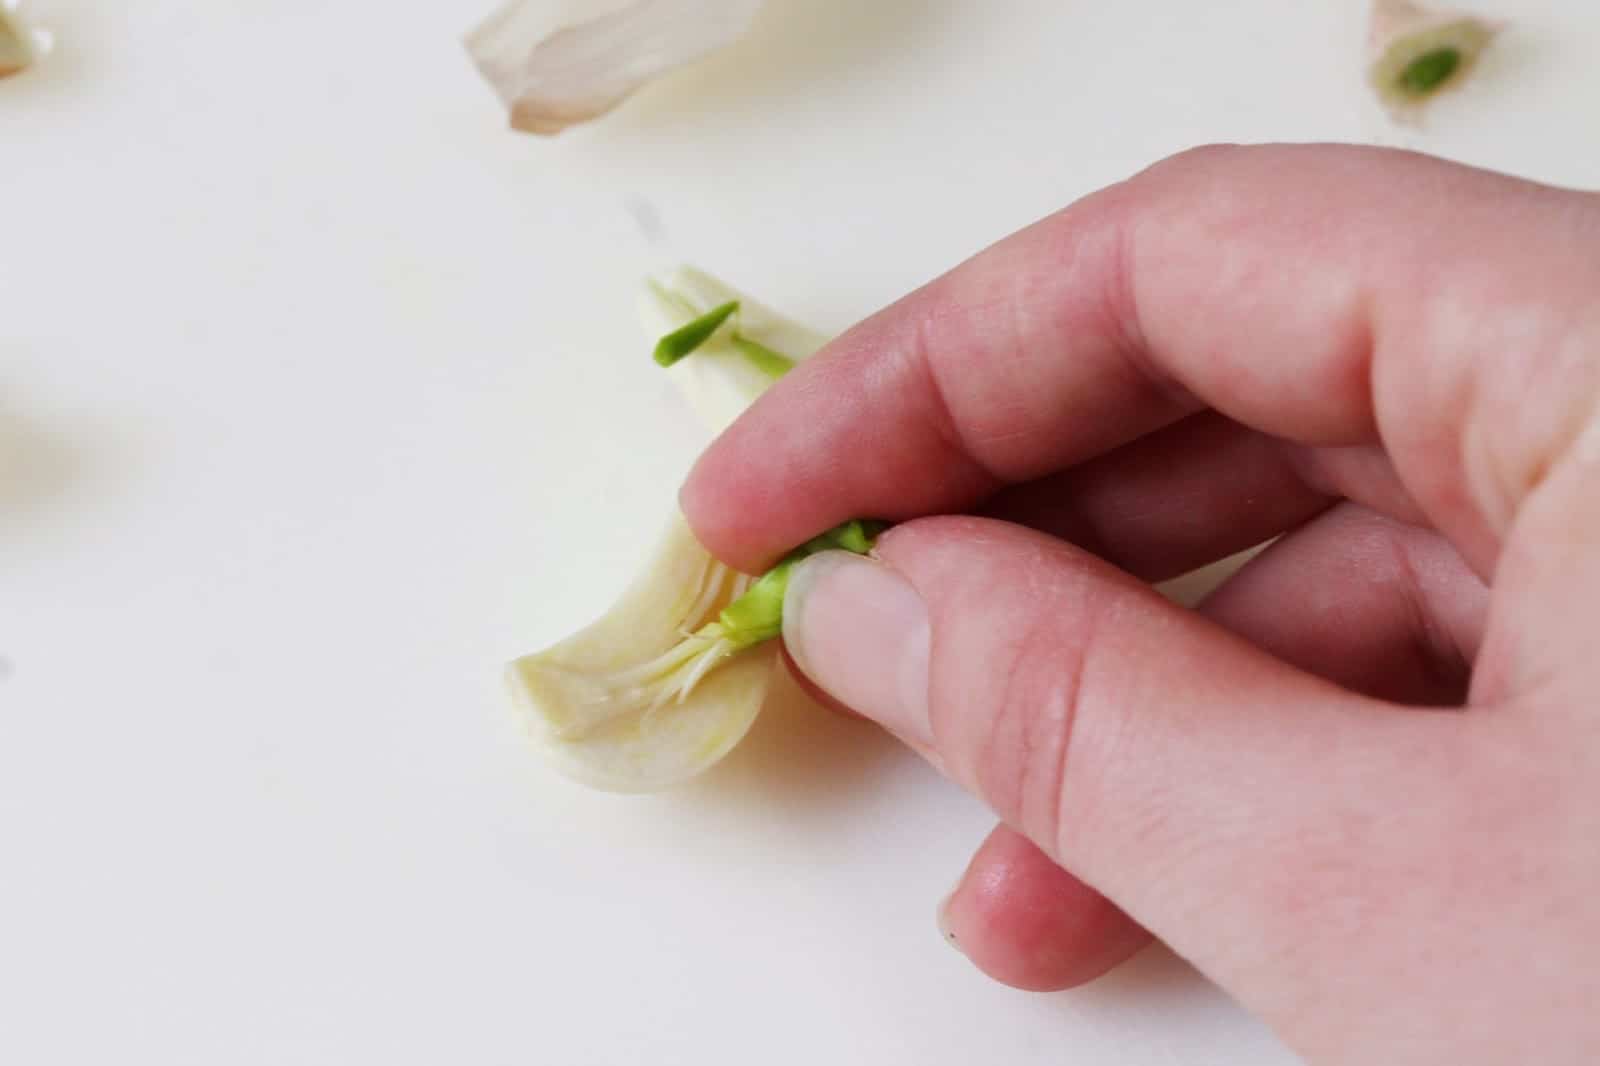 You can now grab on to that green center and pull it out, leaving the rest of the garlic to use for your recipe!